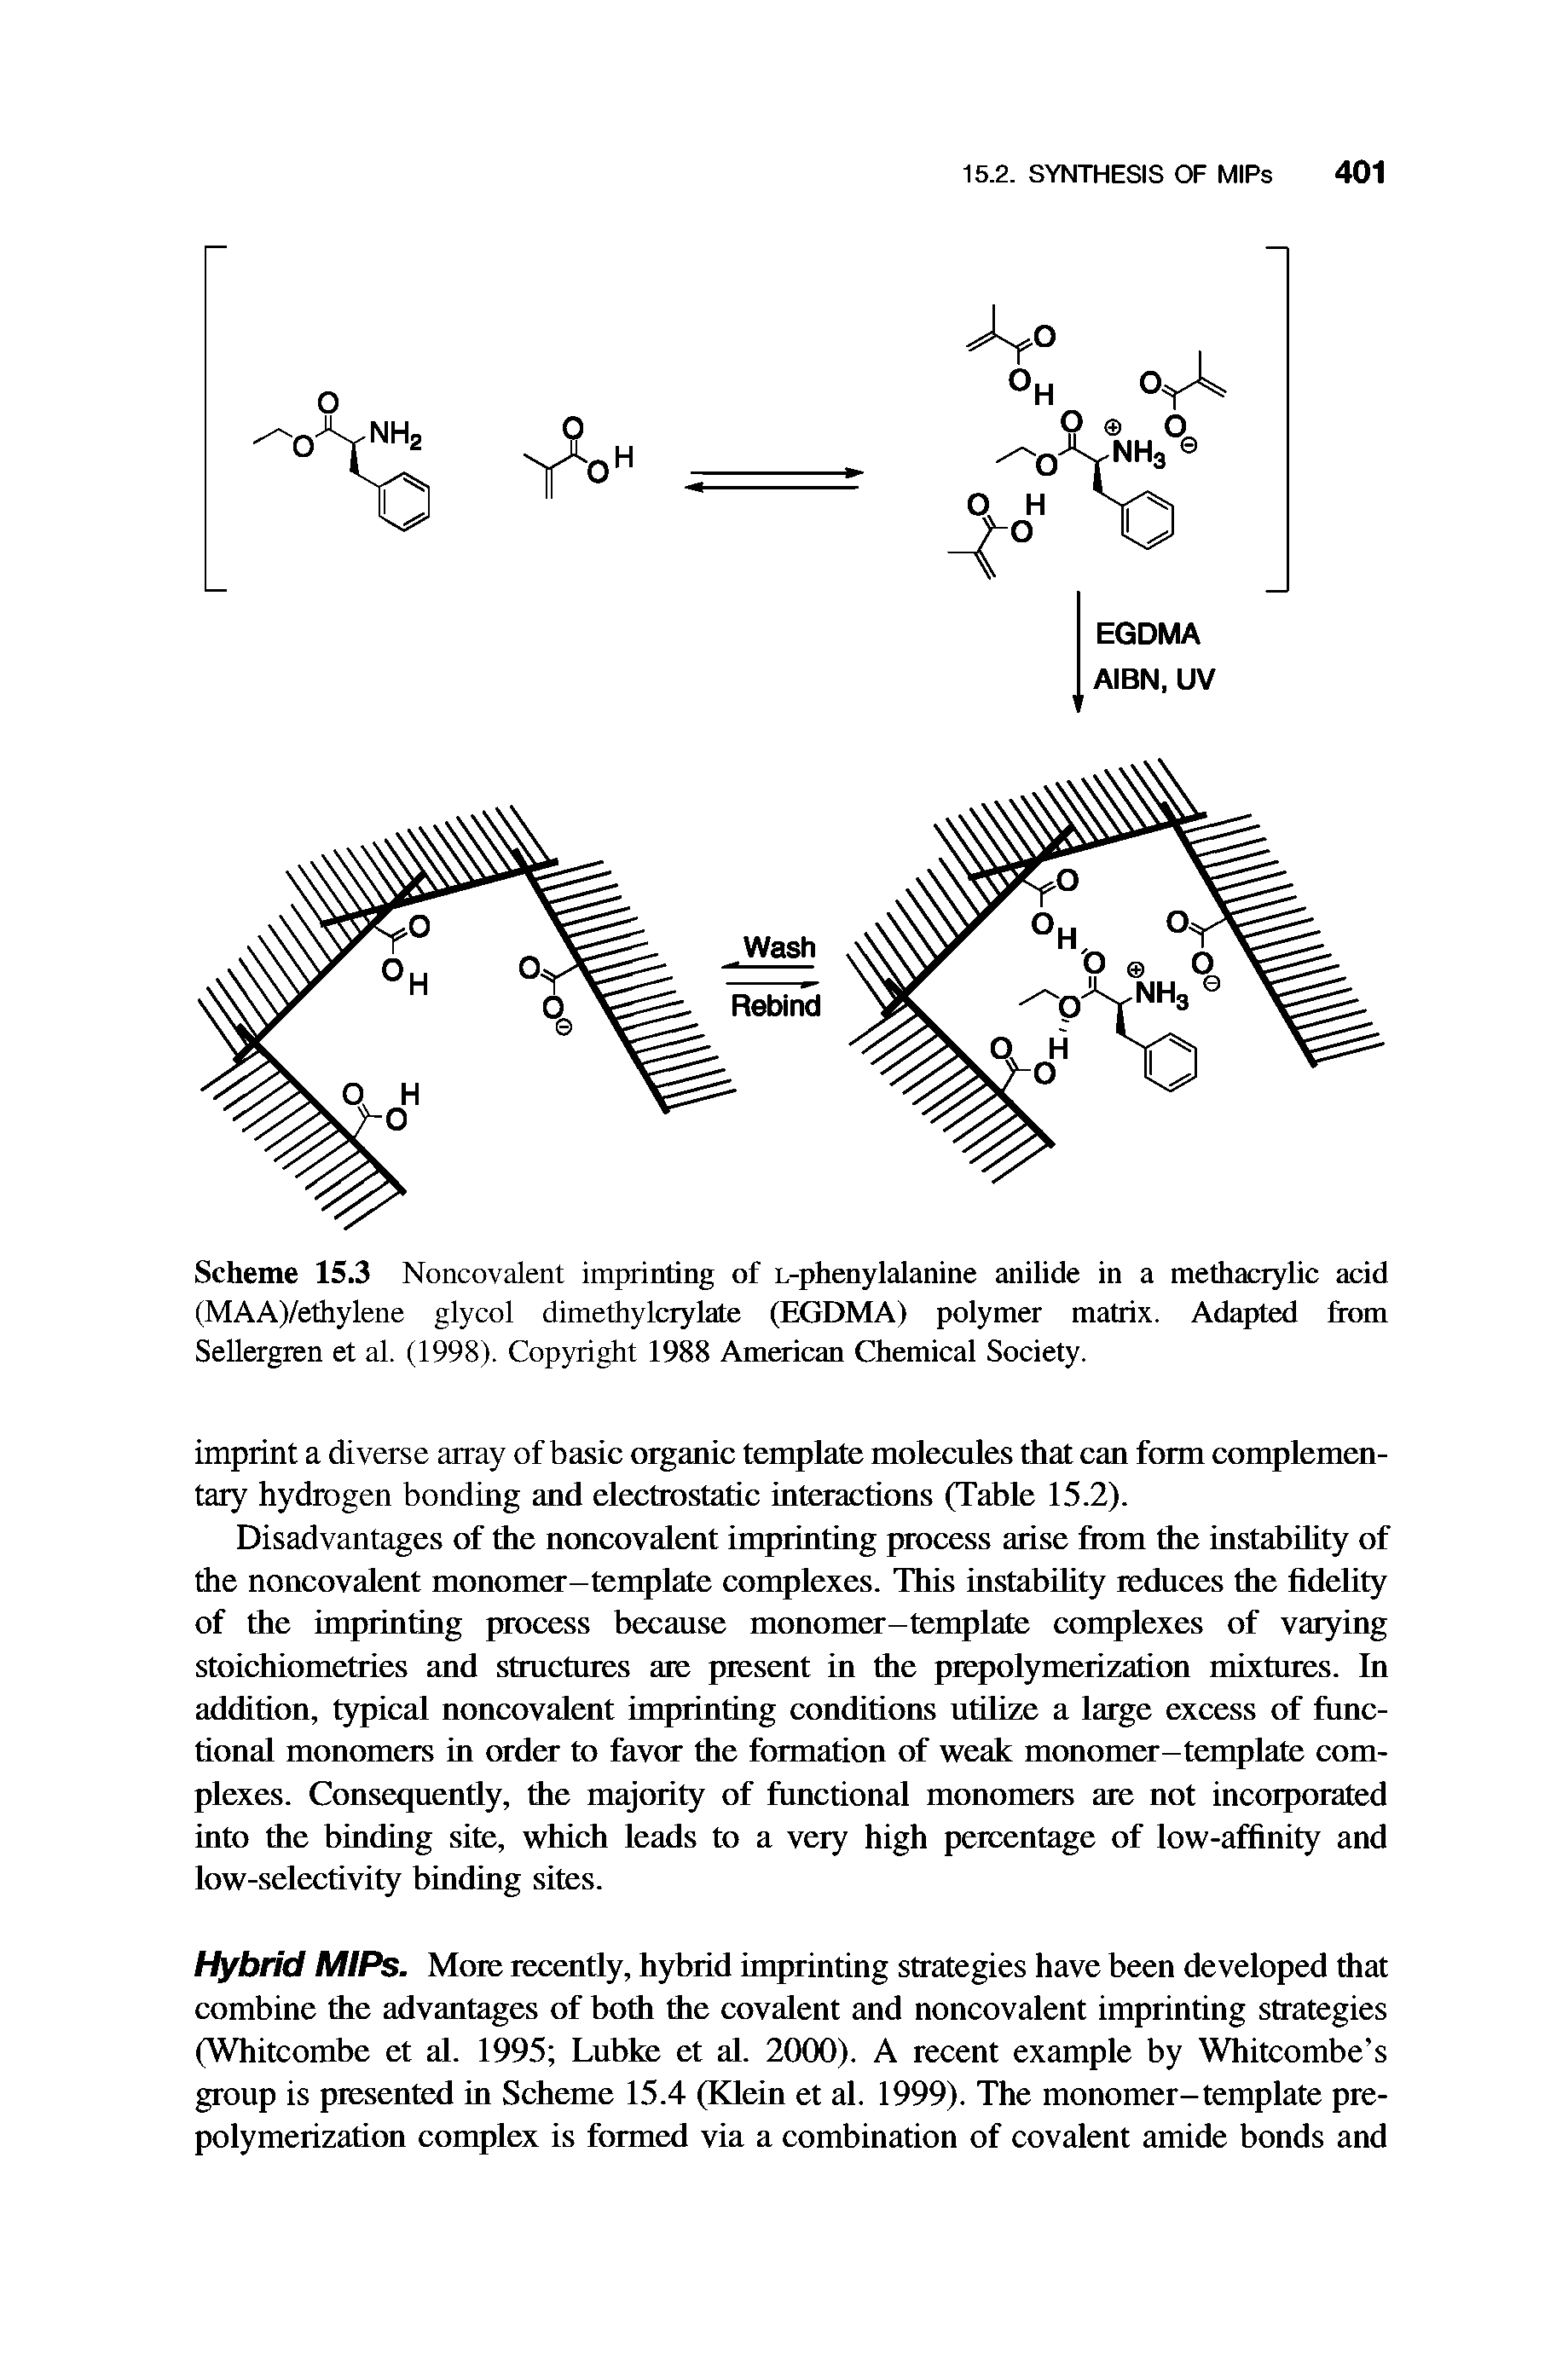 Scheme 15.3 Noncovalent imprinting of L-phenylalanine anilide in a methacrylic acid (MAA)/ethylene glycol dimethylcrylate (EGDMA) polymer matrix. Adapted from Sellergren et al. (1998). Copyright 1988 American Chemical Society.